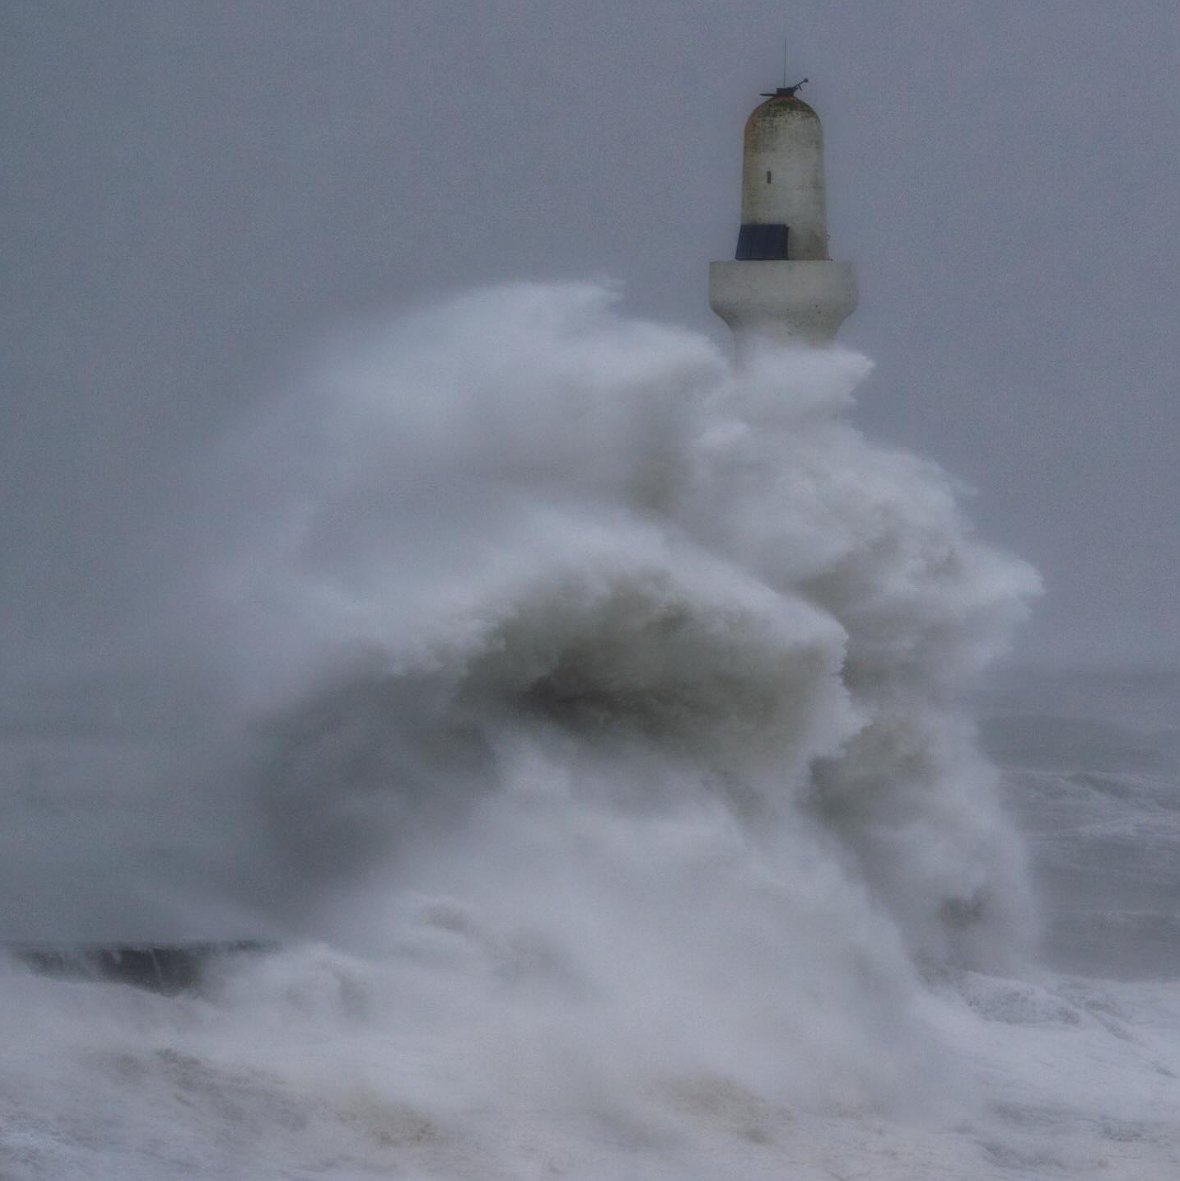 Storm Babet is causing a nuisance in the North East.
@natalieahood has captured it as well as ever, from the South Breakwater Pier at Greyhope Bay.

#aberdeen #aberdeenshire  #scotland #torry #greyhopebay #abdn  #beautifulabdn #southbreakwaterpier #northsea #stormbabet